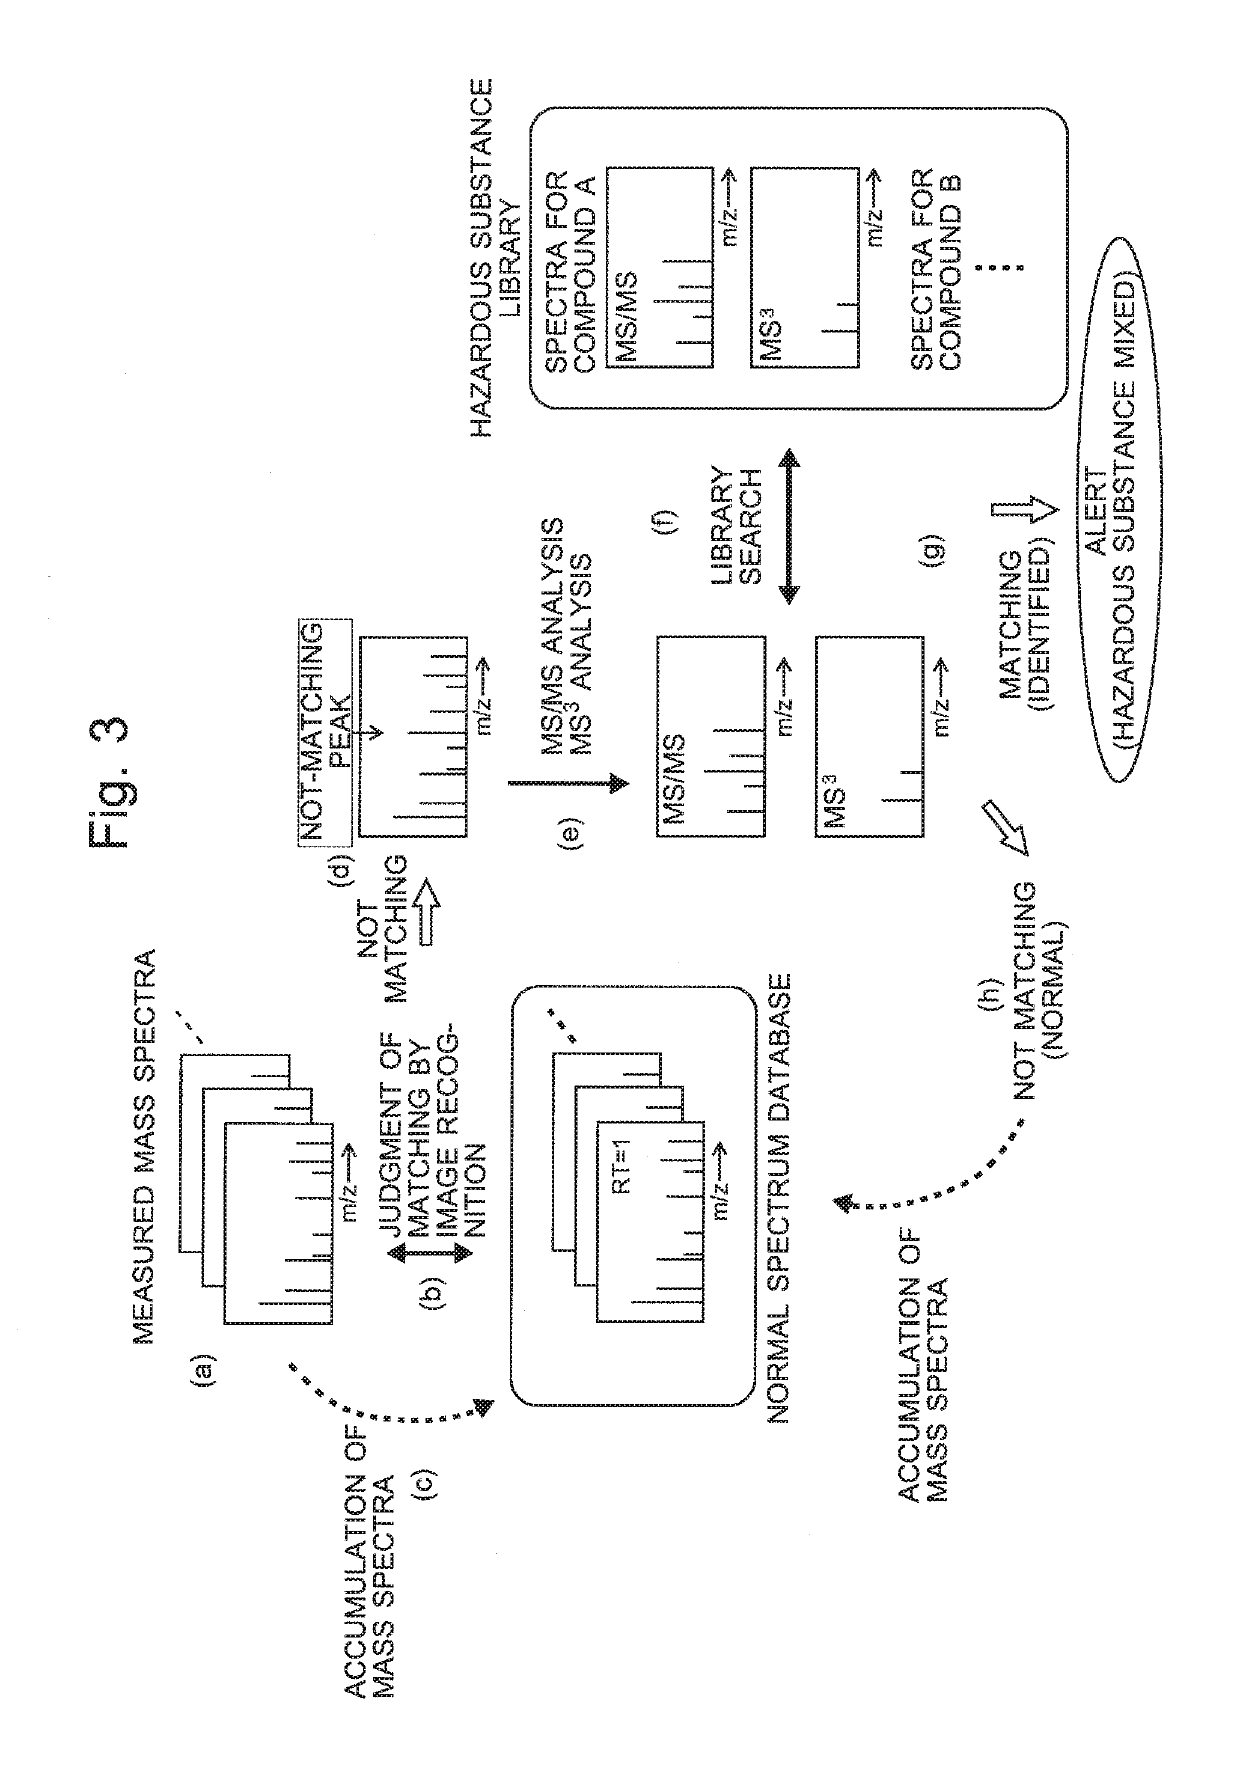 Specific substance monitoring system using mass spectrometer